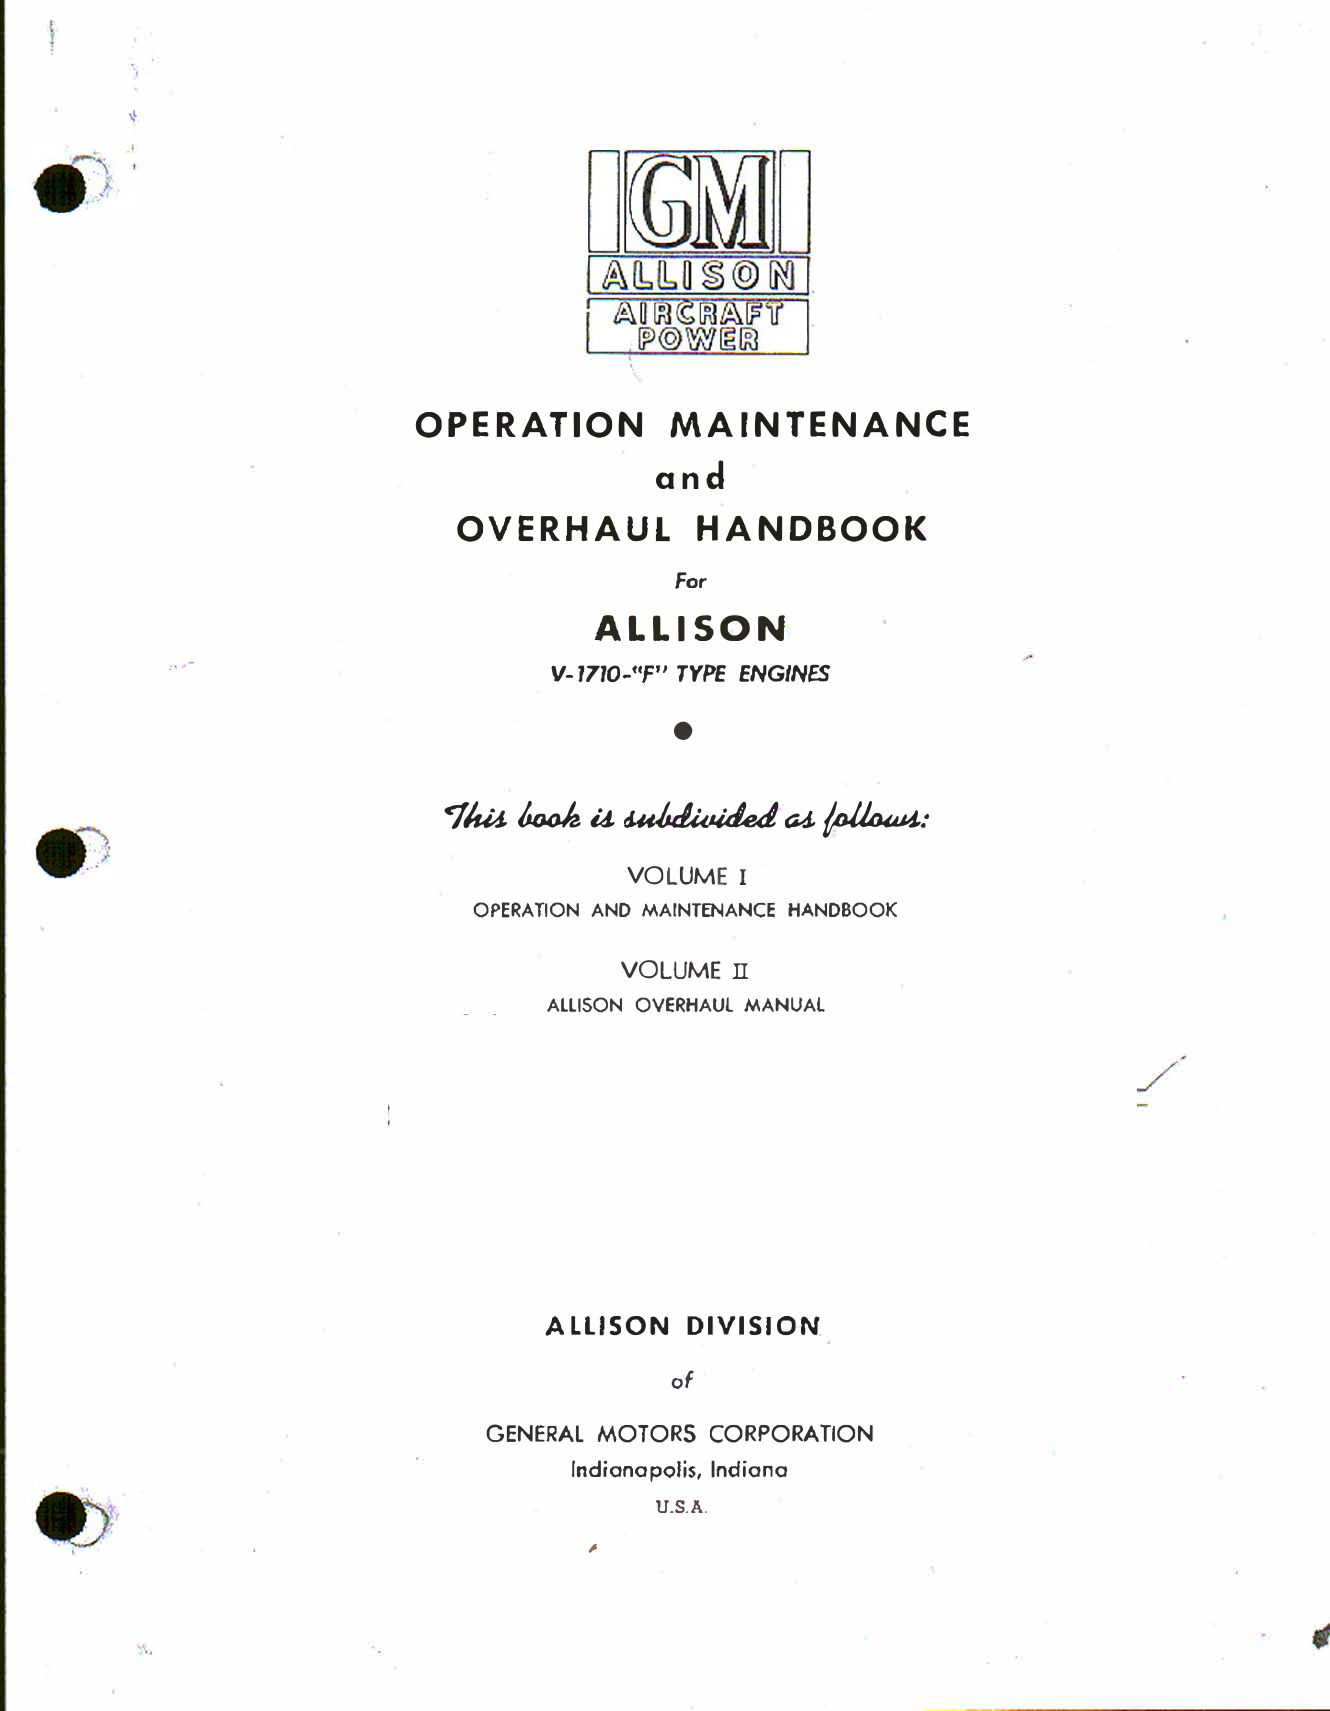 Sample page 1 from AirCorps Library document: Operation Maintenance & Overhaul Handbook - Allison V-1710-F Engines